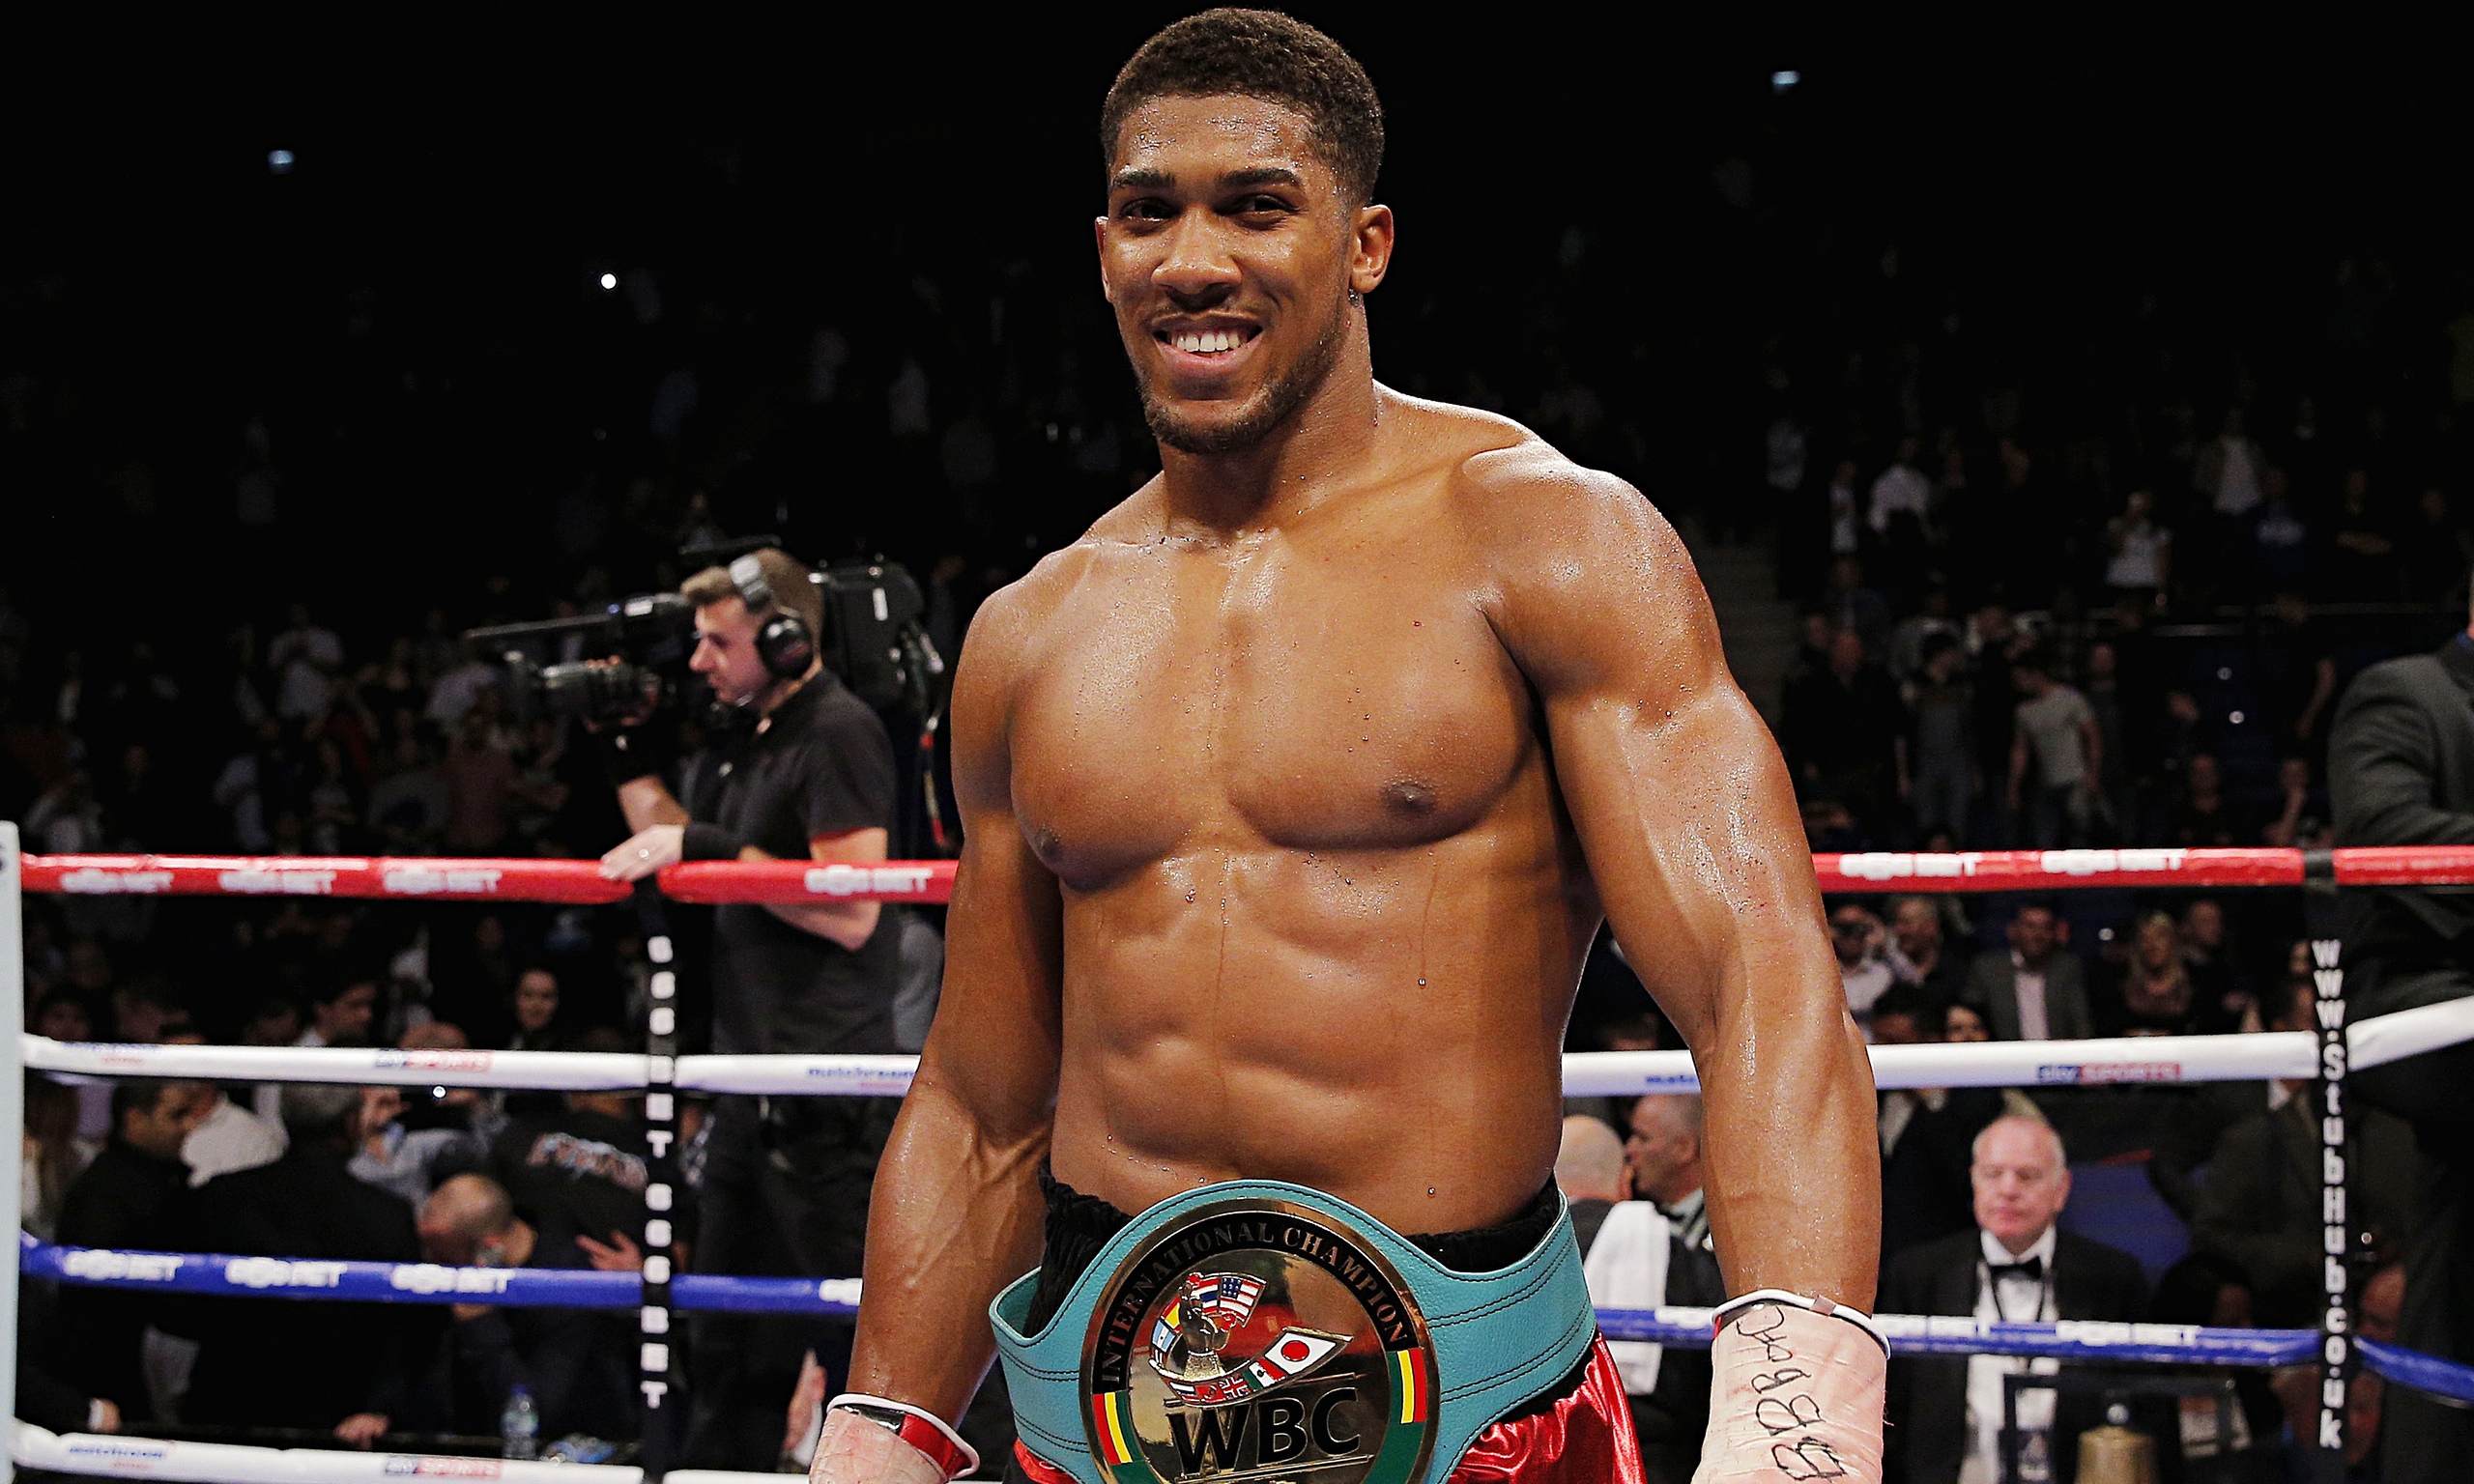 Joshua will retire from the sport after winning all the titles